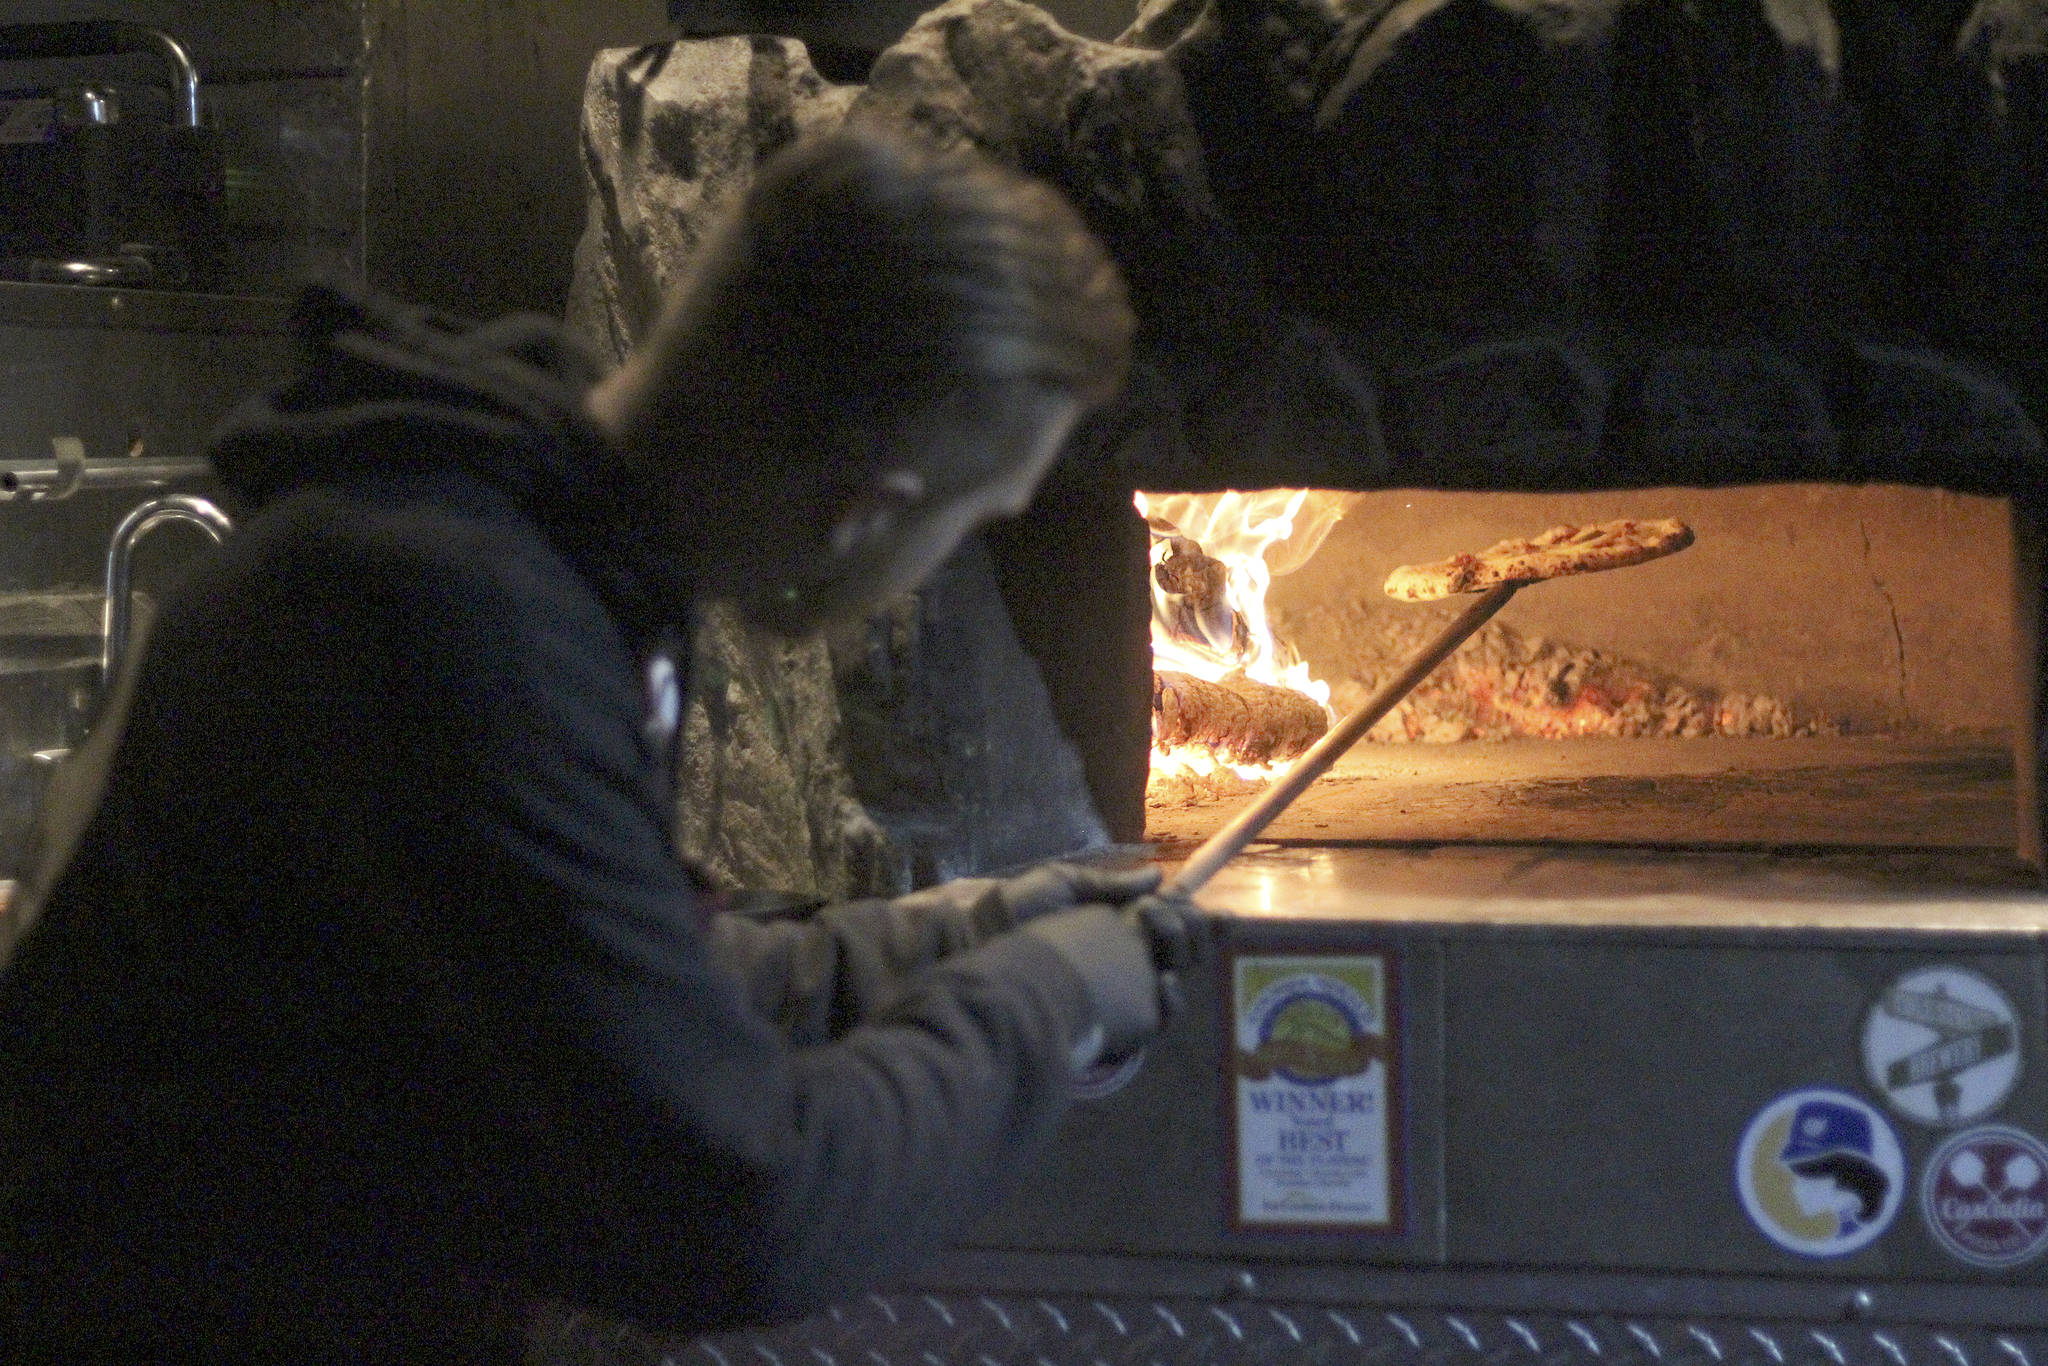 Cascadia Pizza Co. baker Stephen Hendrickson checks his pizza while waiting for business outside Headworks Brewing to pick up. Unlike many food trucks, Cascadia customers can watch everything its bakers do, since the oven is located on the outside. Photo by Ray Miller-Still